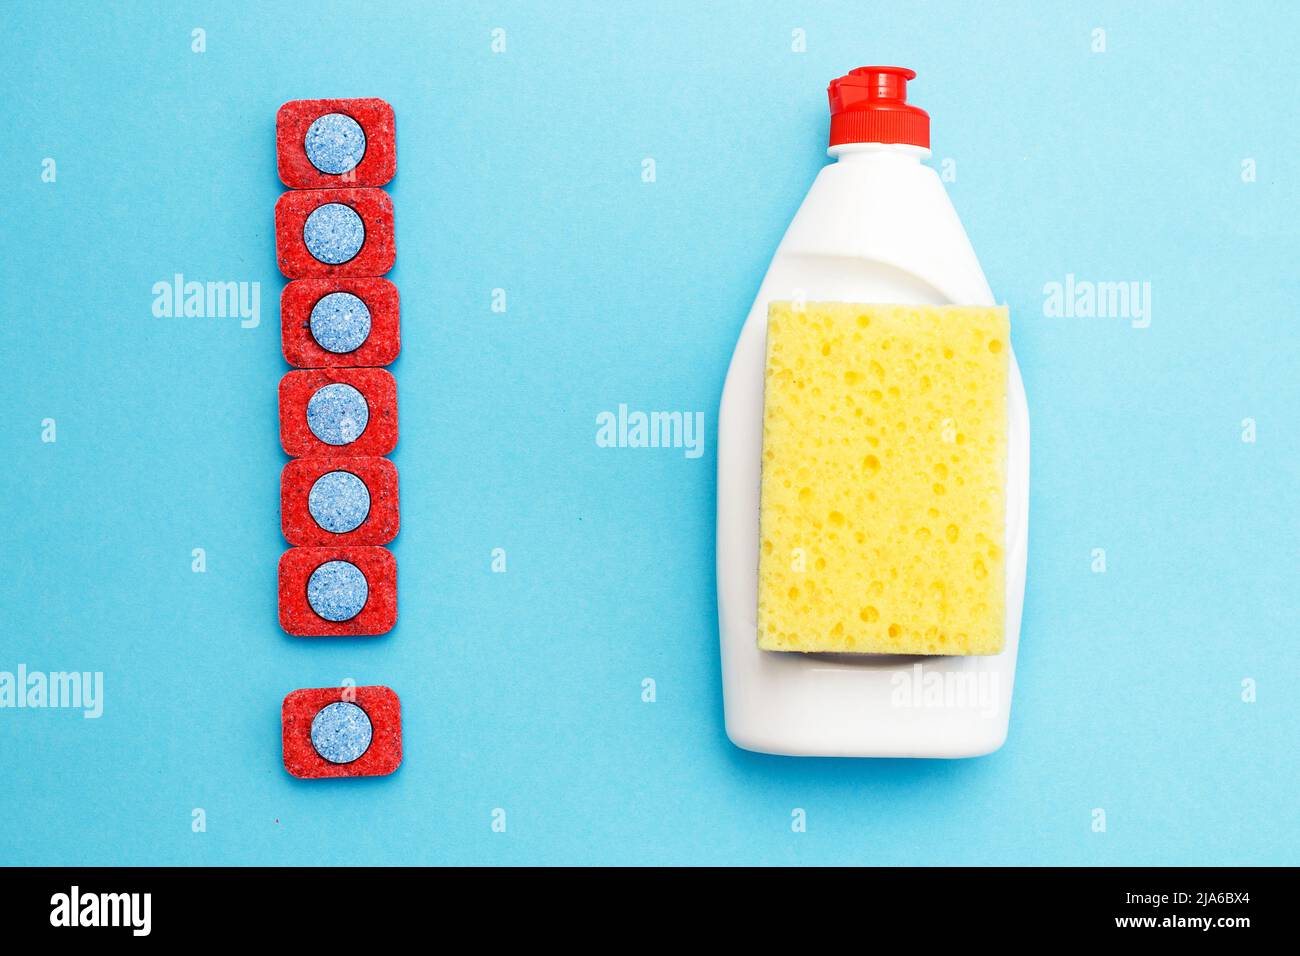 capsules for dishwashers, dishwashing detergents liquid and sponges on a blue background. dishwasher vs hand wash concept. which is better. flat lay. Stock Photo